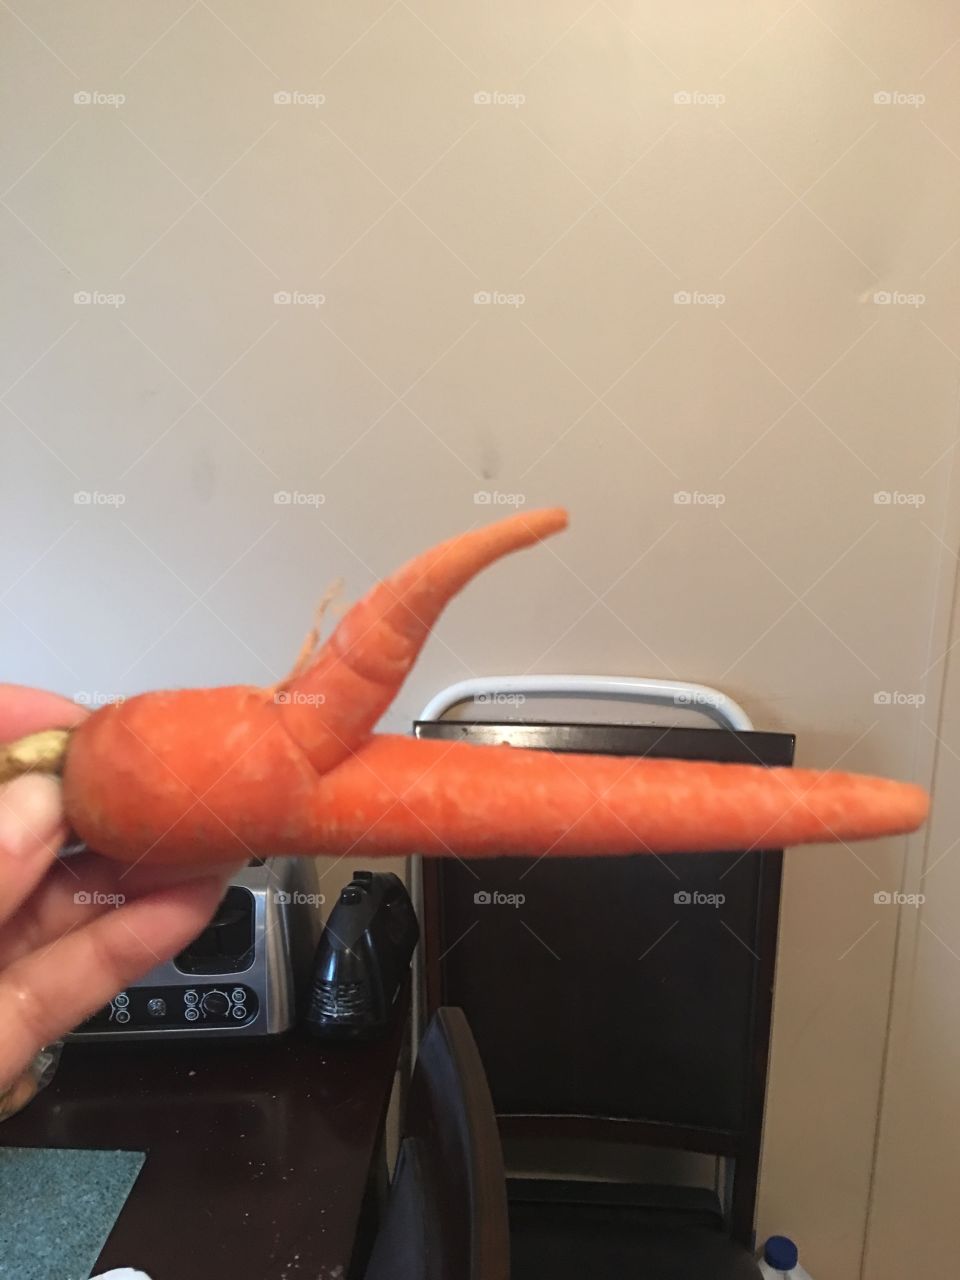 My carrot with a finger 